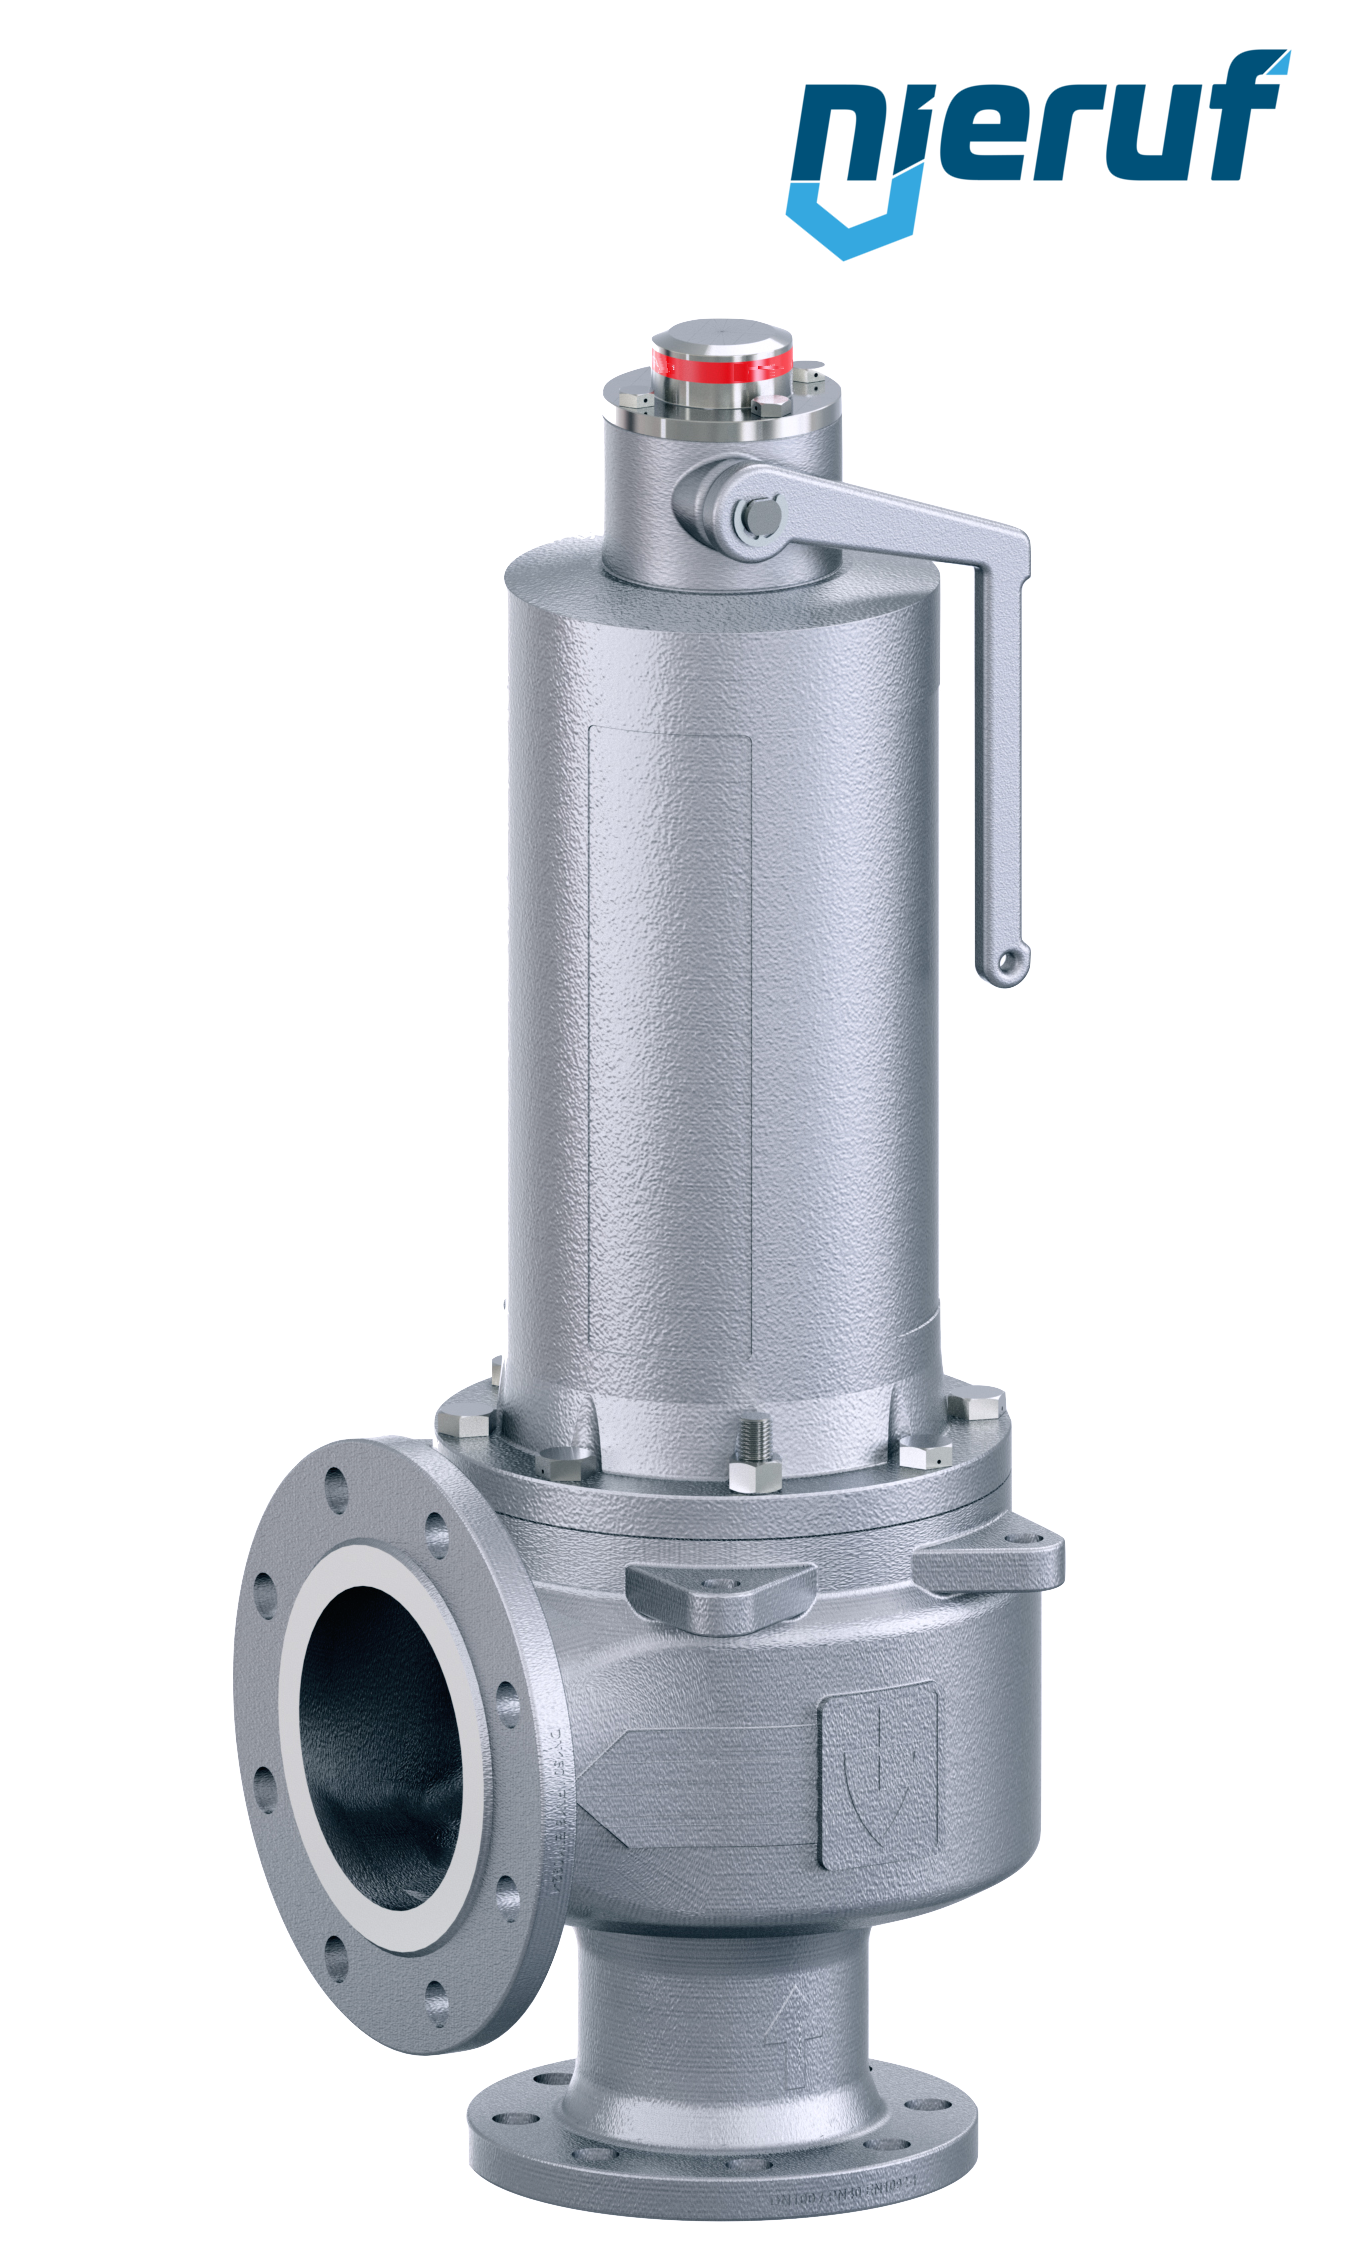 flange-safety valve DN32/DN50 SF04, stainless steel metal, with lifting device lever